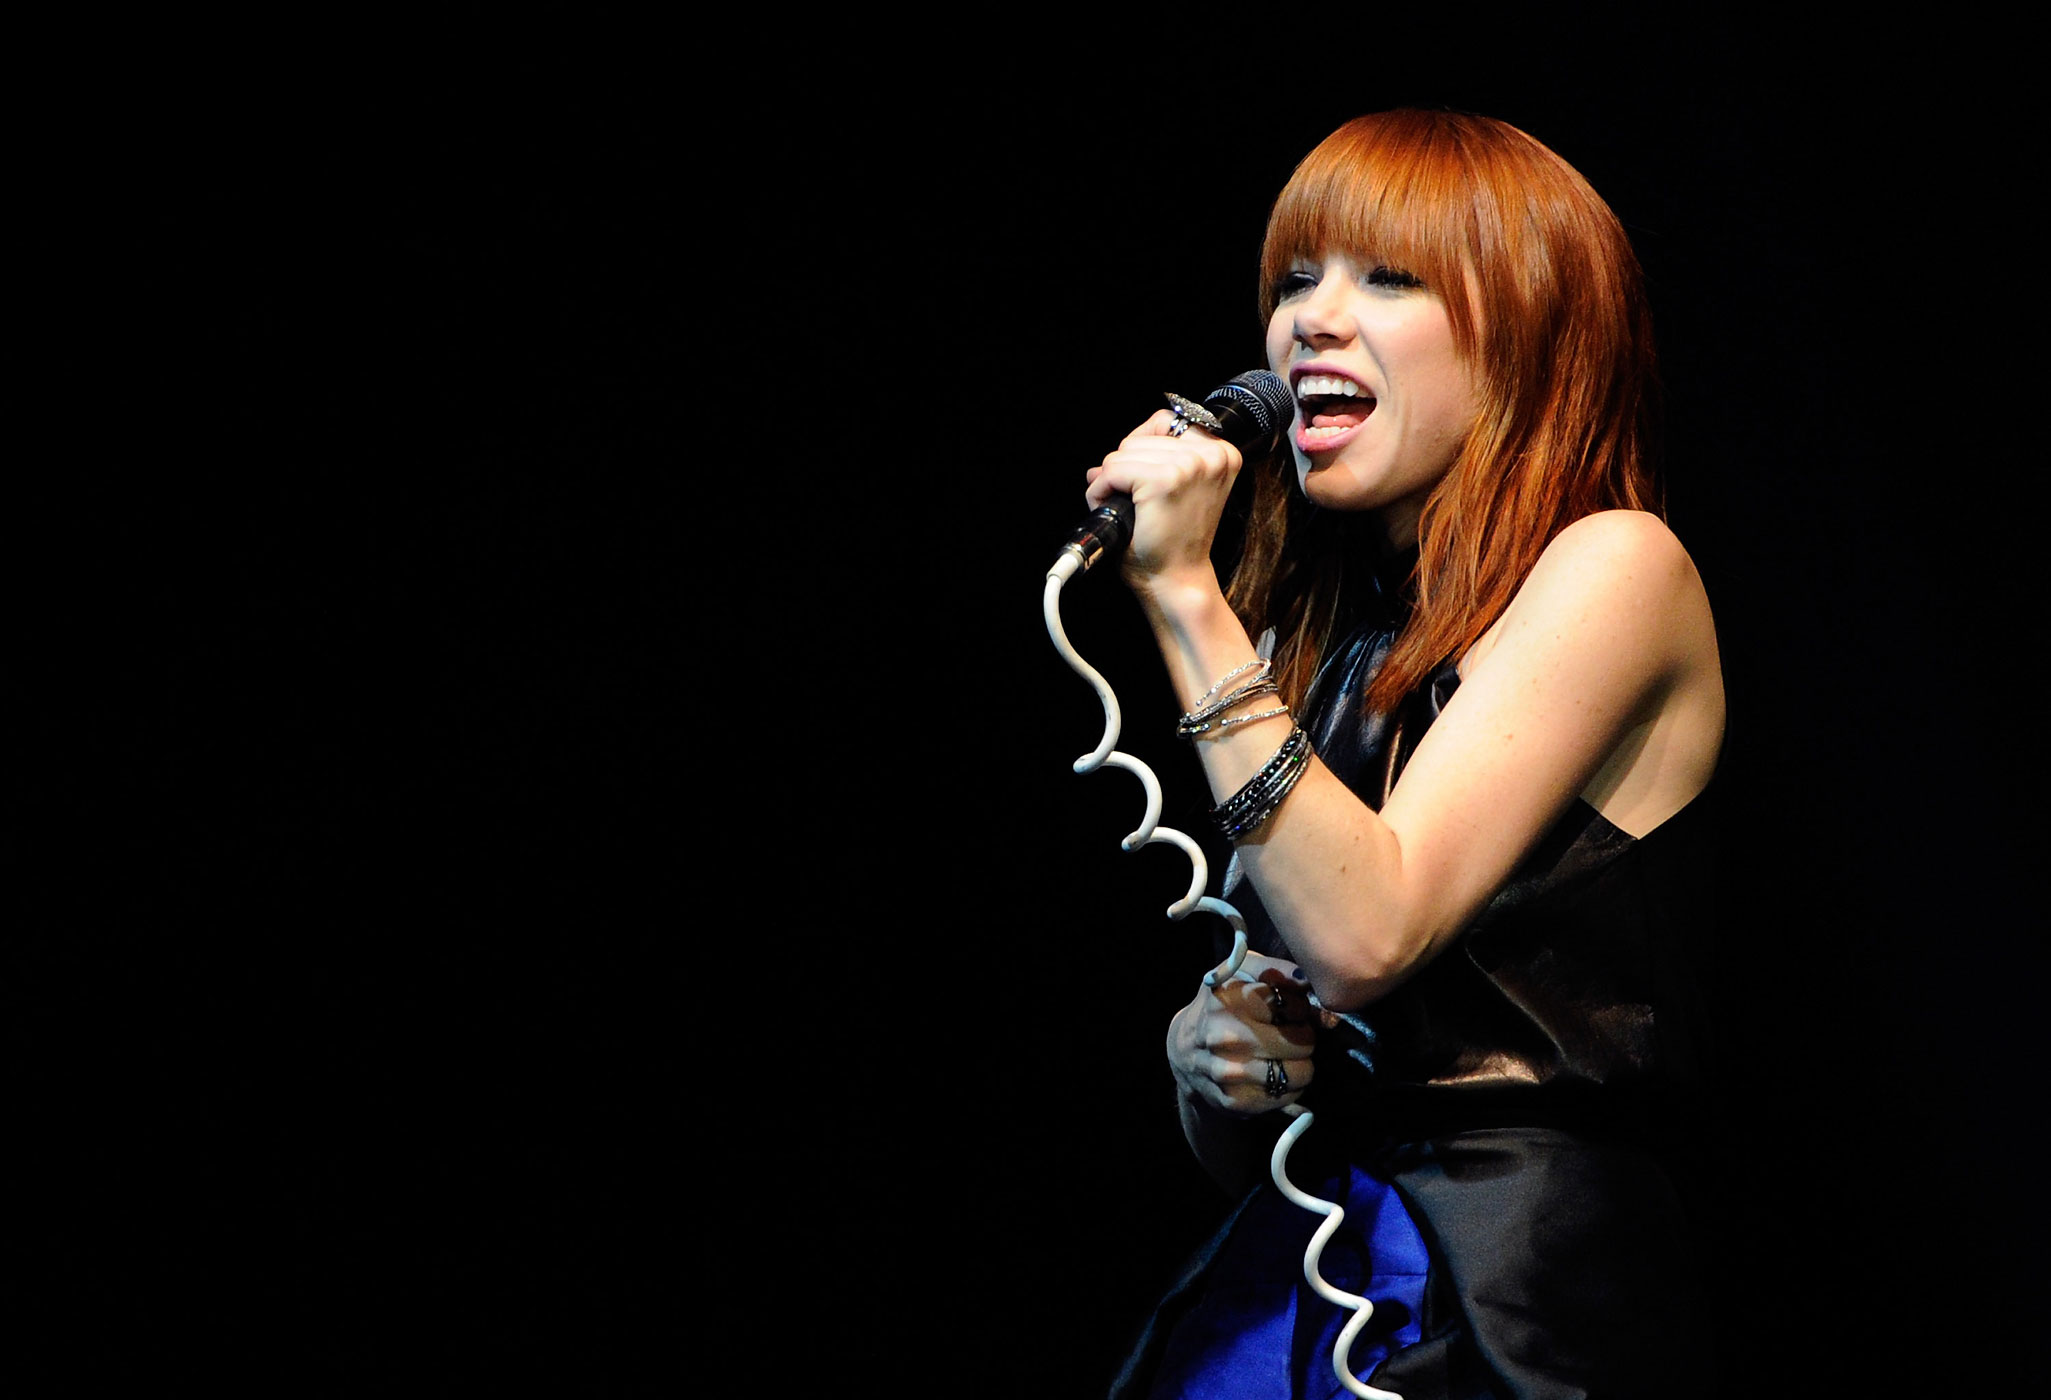 Carly Rae Jepsen performs at the "UniteLIVE: The Concert to Rock Out Bullying" at the Thomas &amp; Mack Center on Oct. 3, 2013 in Las Vegas, Nevada. (David Becker—Getty Images)